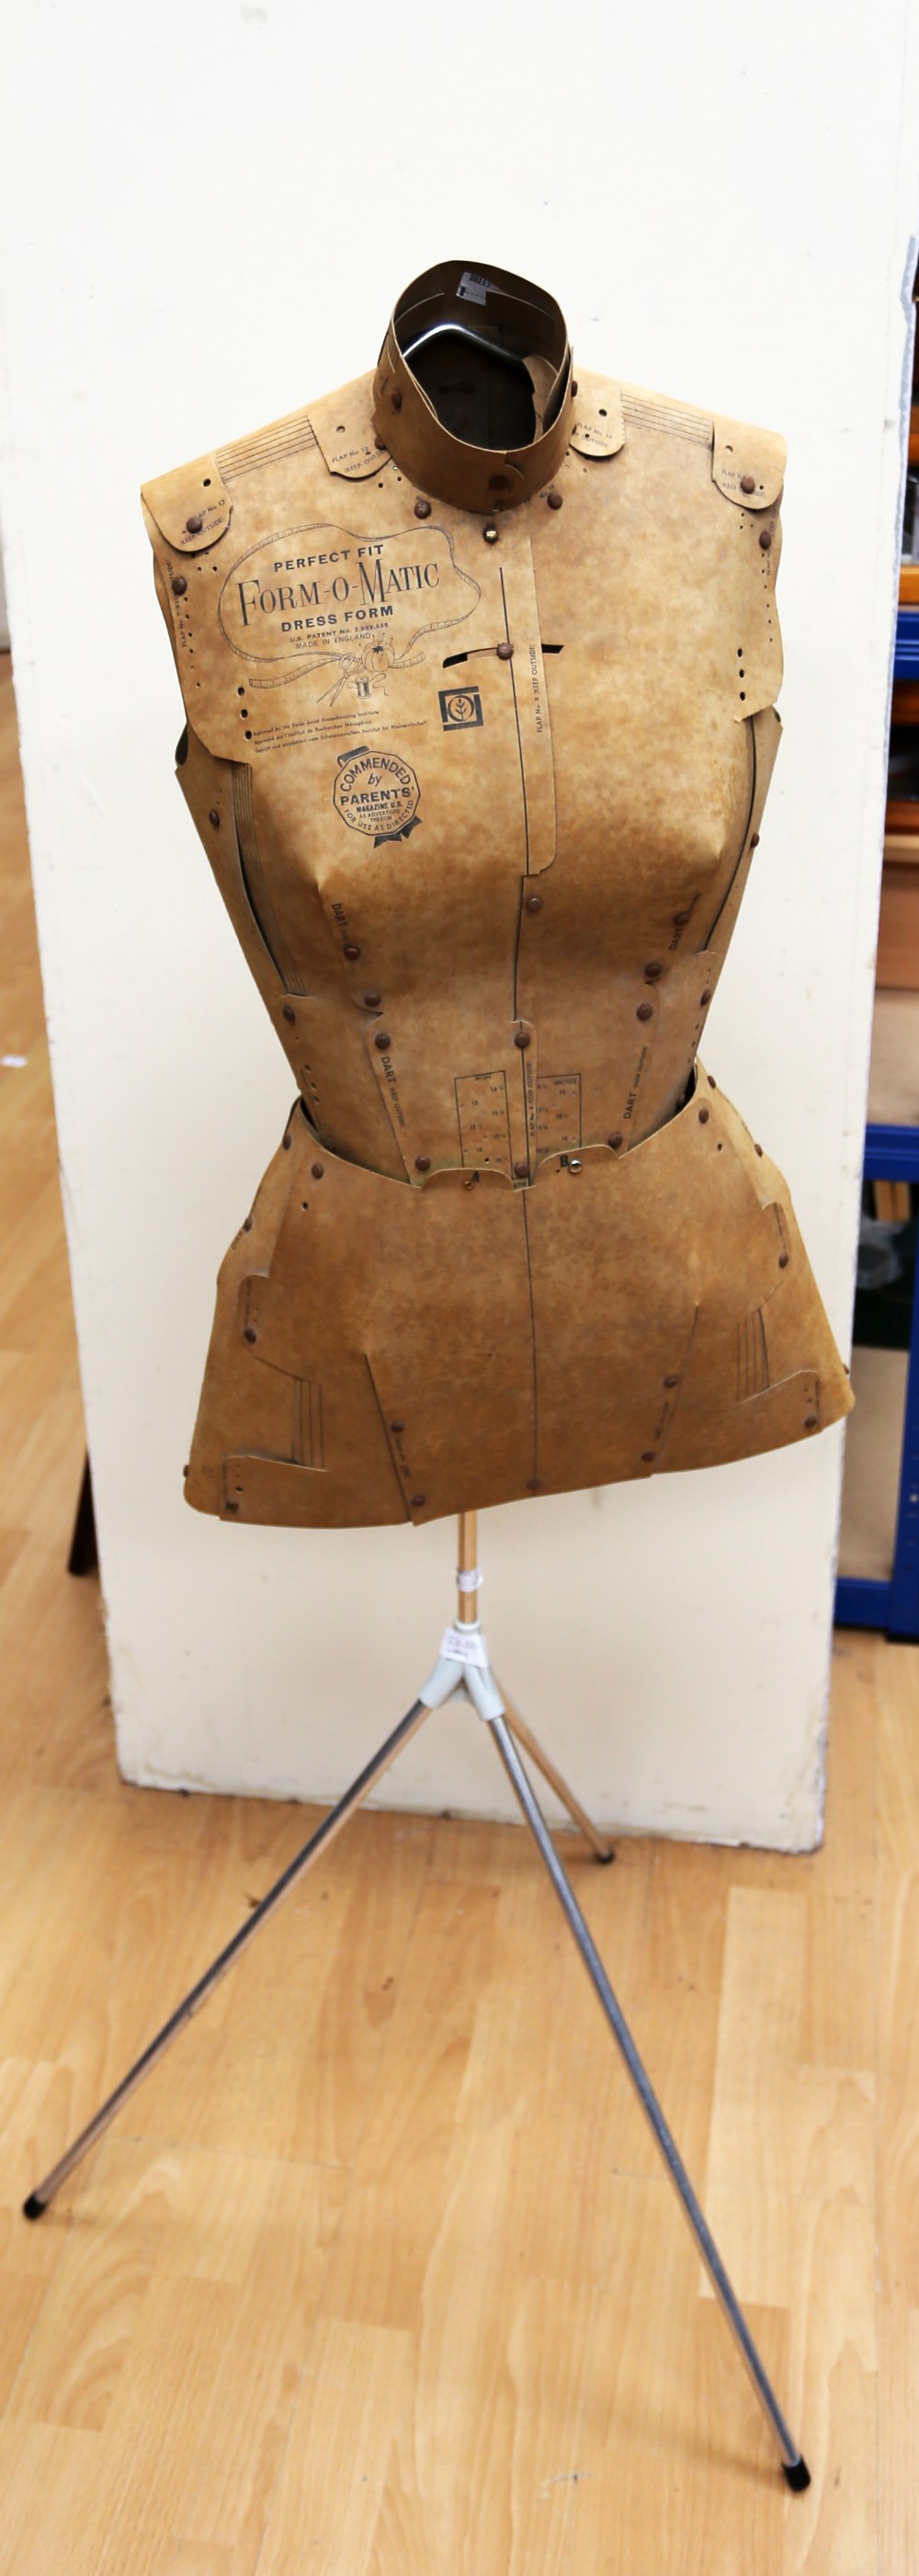 A vintage heavy duty cardboard tailors dummy with measurements printed onto the form, made by